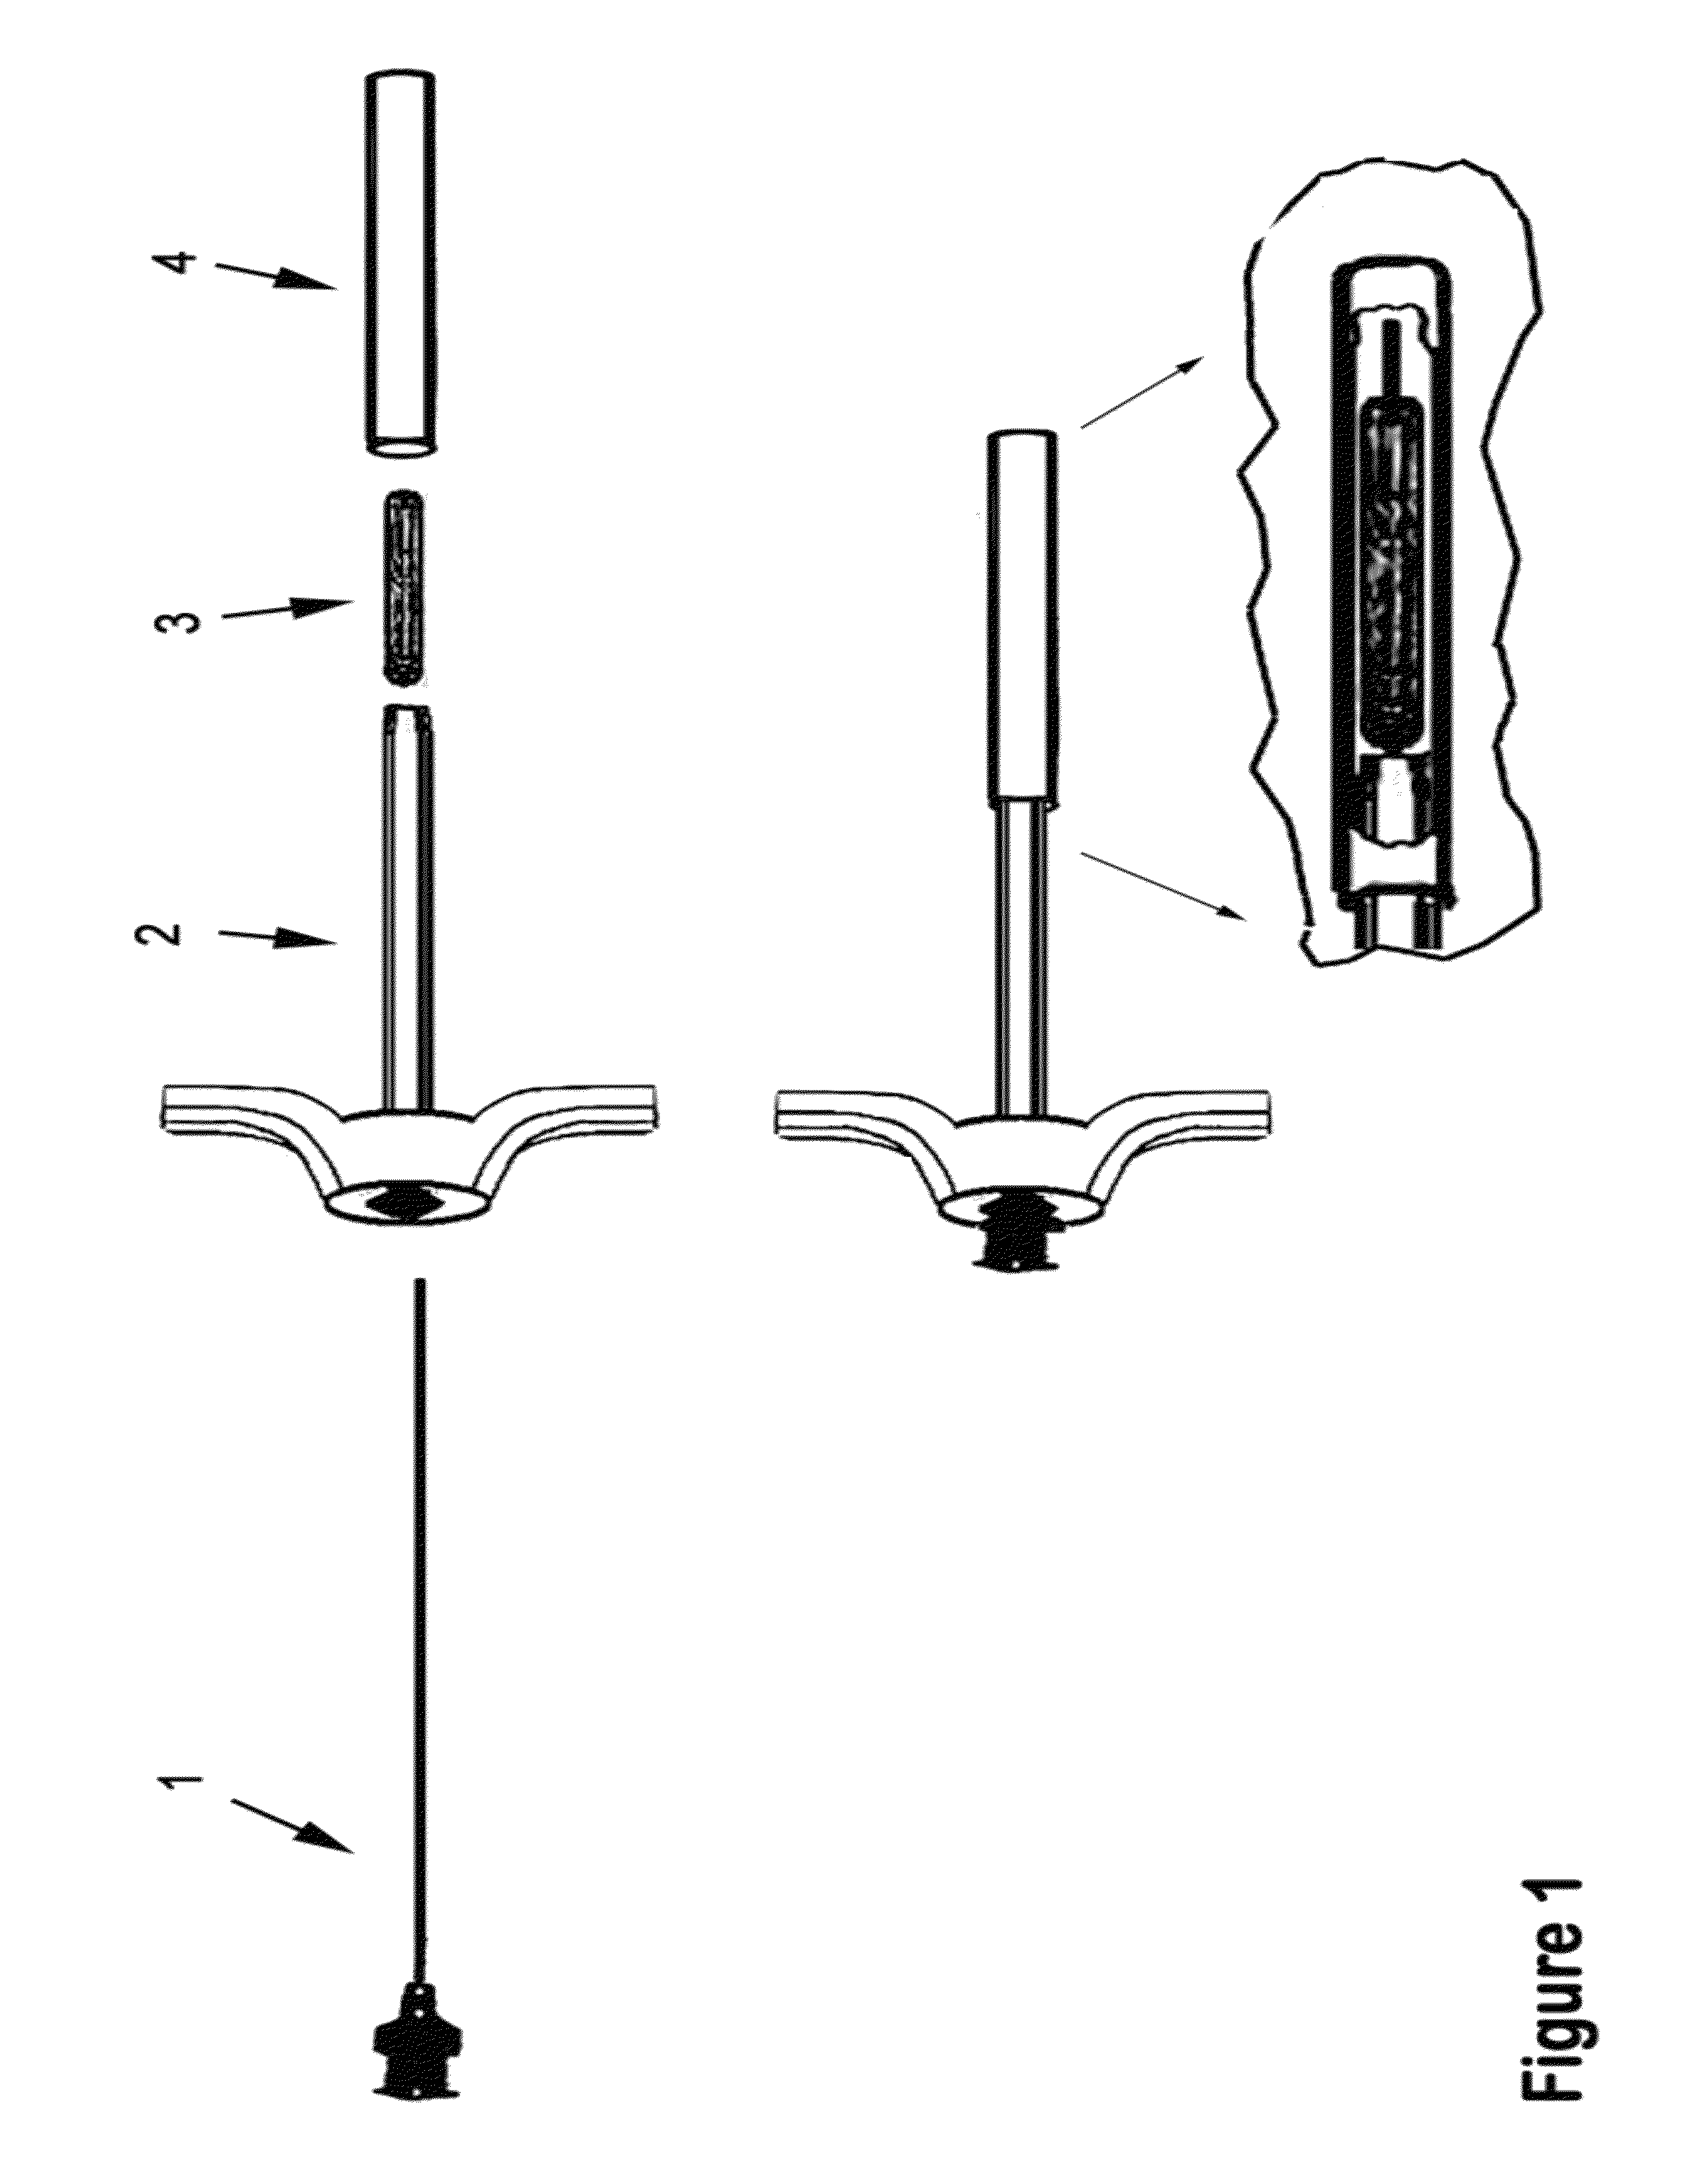 Therapeutic material delivery system for tissue voids and cannulated implants